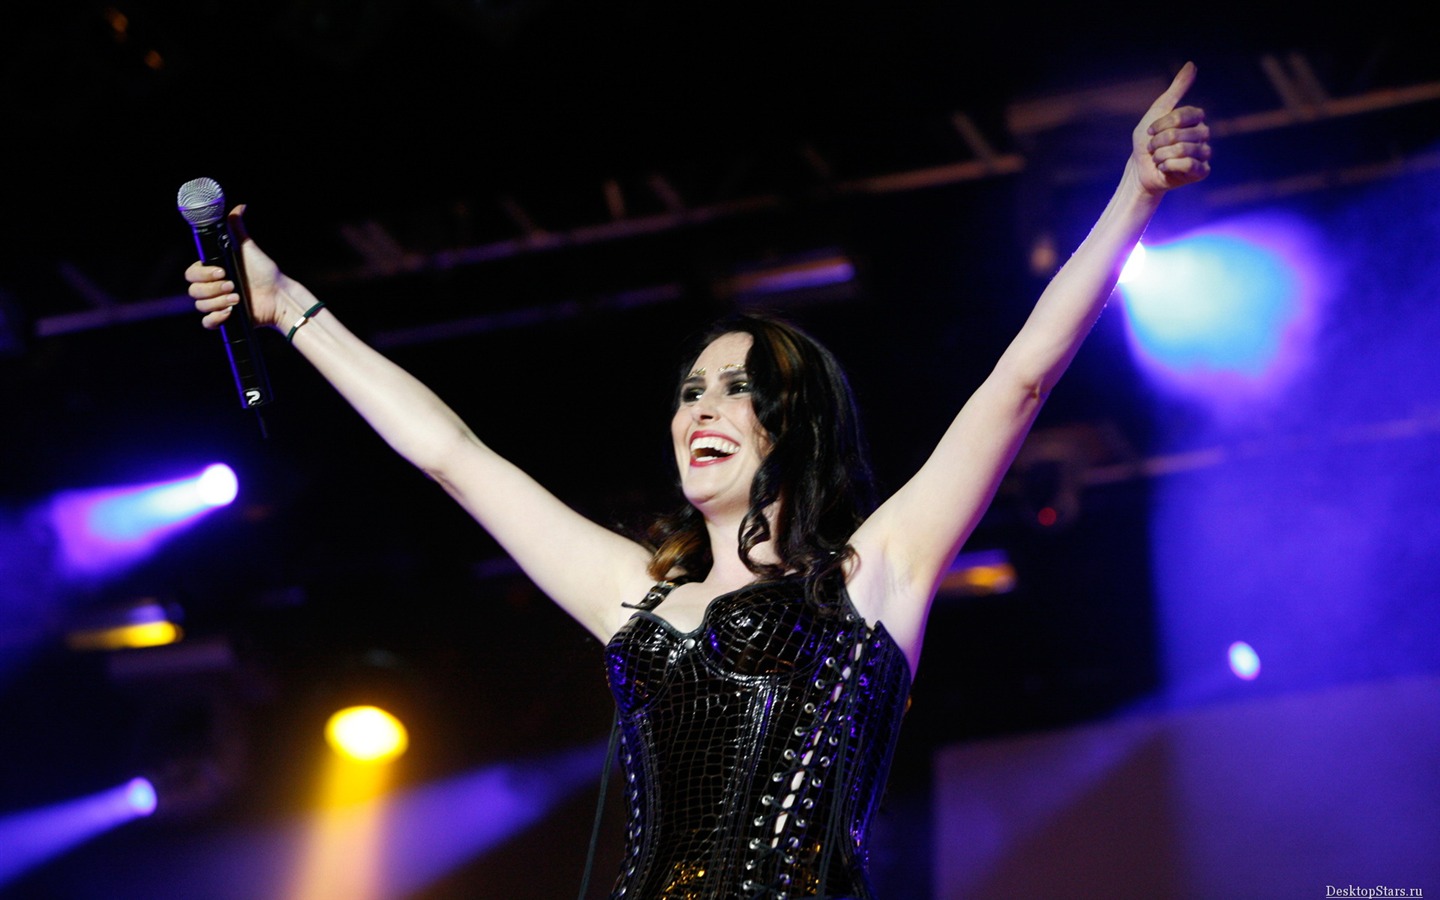 Sharon den Adel #011 - 1440x900 Wallpapers Pictures Photos Images